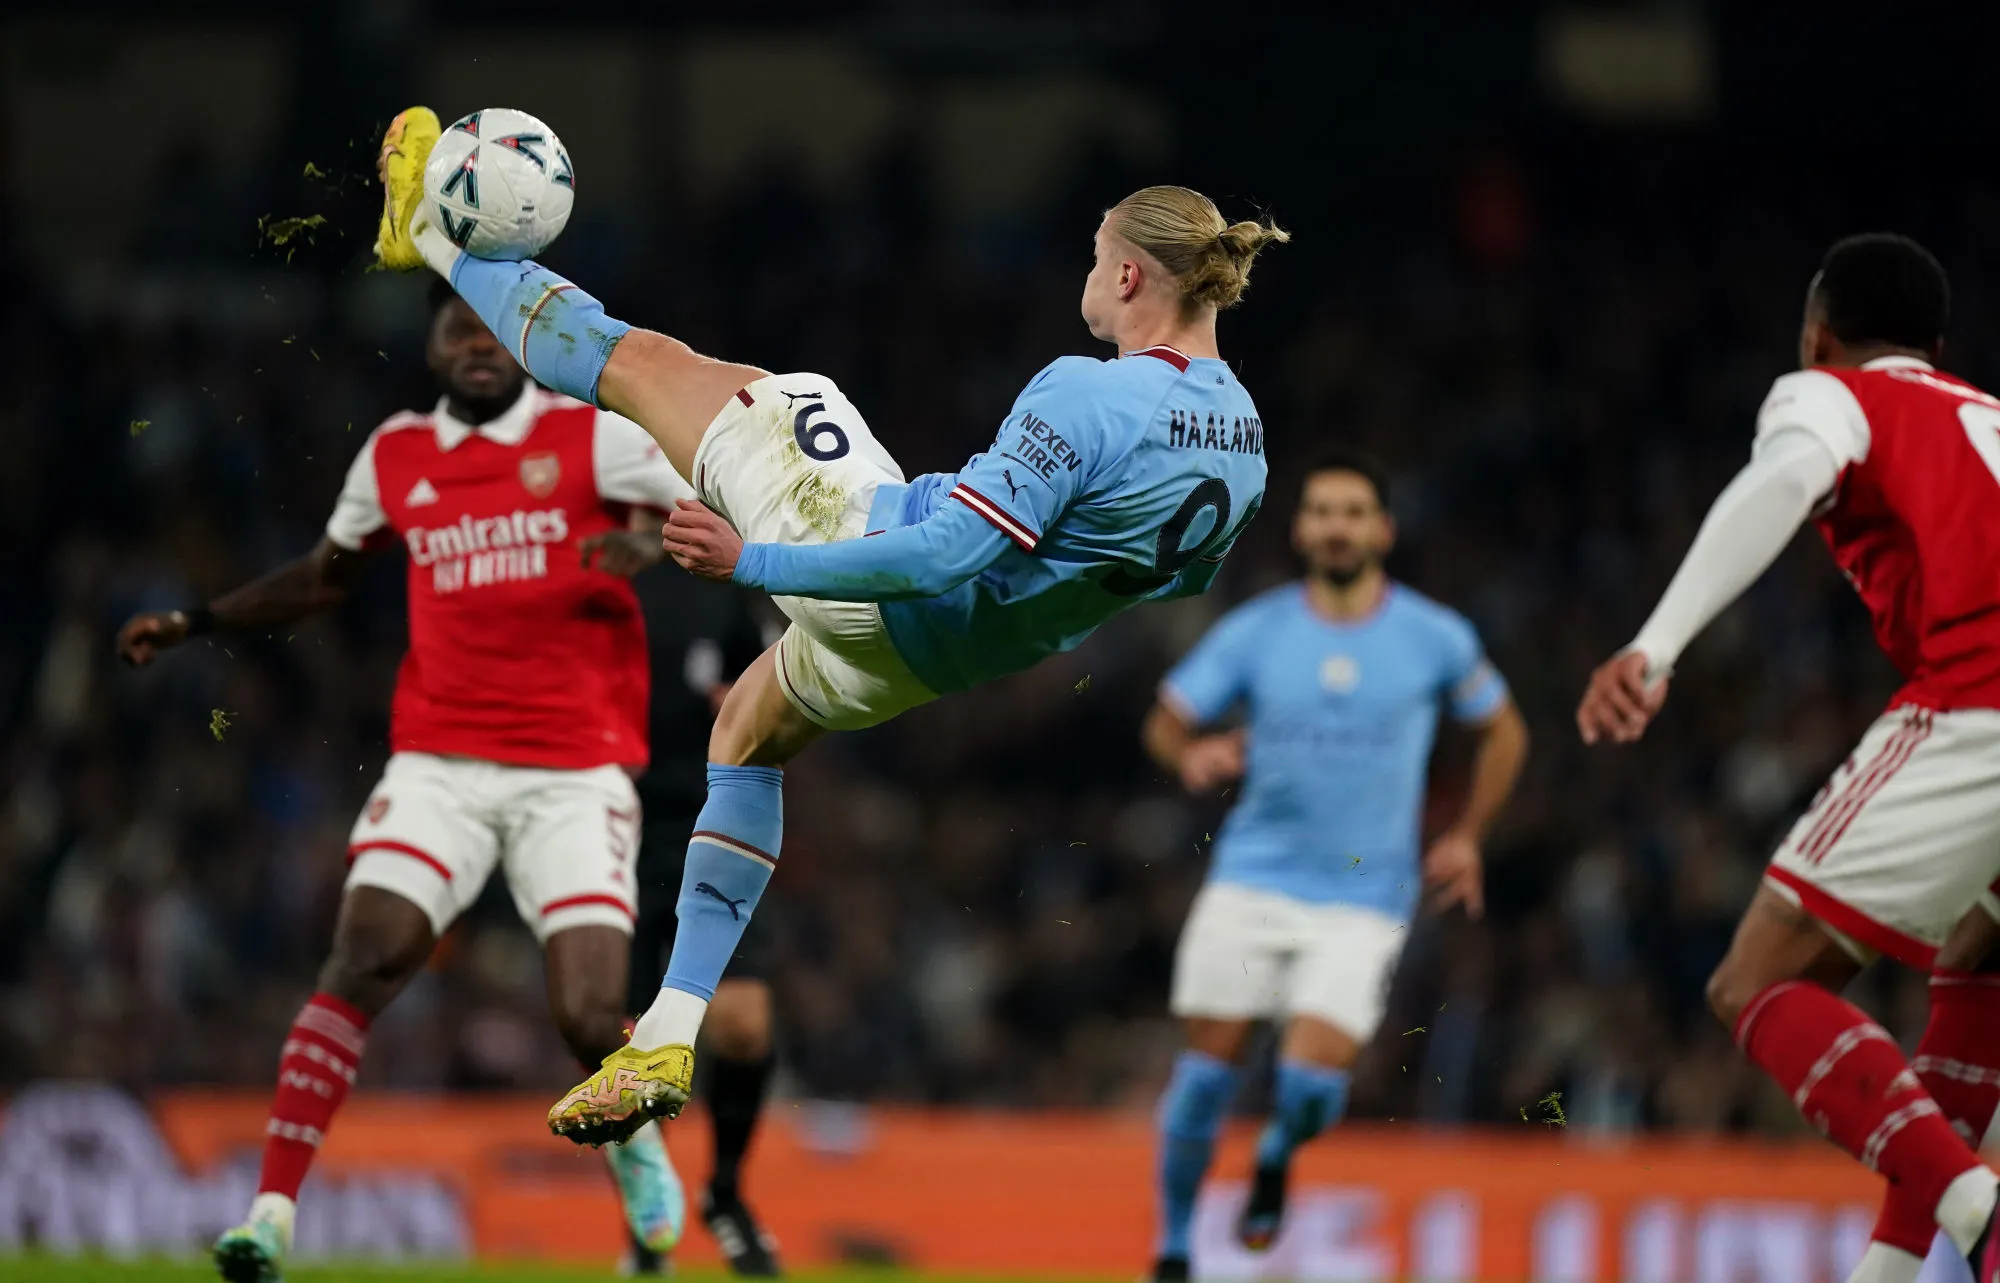 Manchester City's Erling Haaland attempts an overhead kick during the Emirates FA Cup fourth round match at Etihad Stadium, Manchester. Picture date: Friday January 27, 2023. - Photo by Icon sport